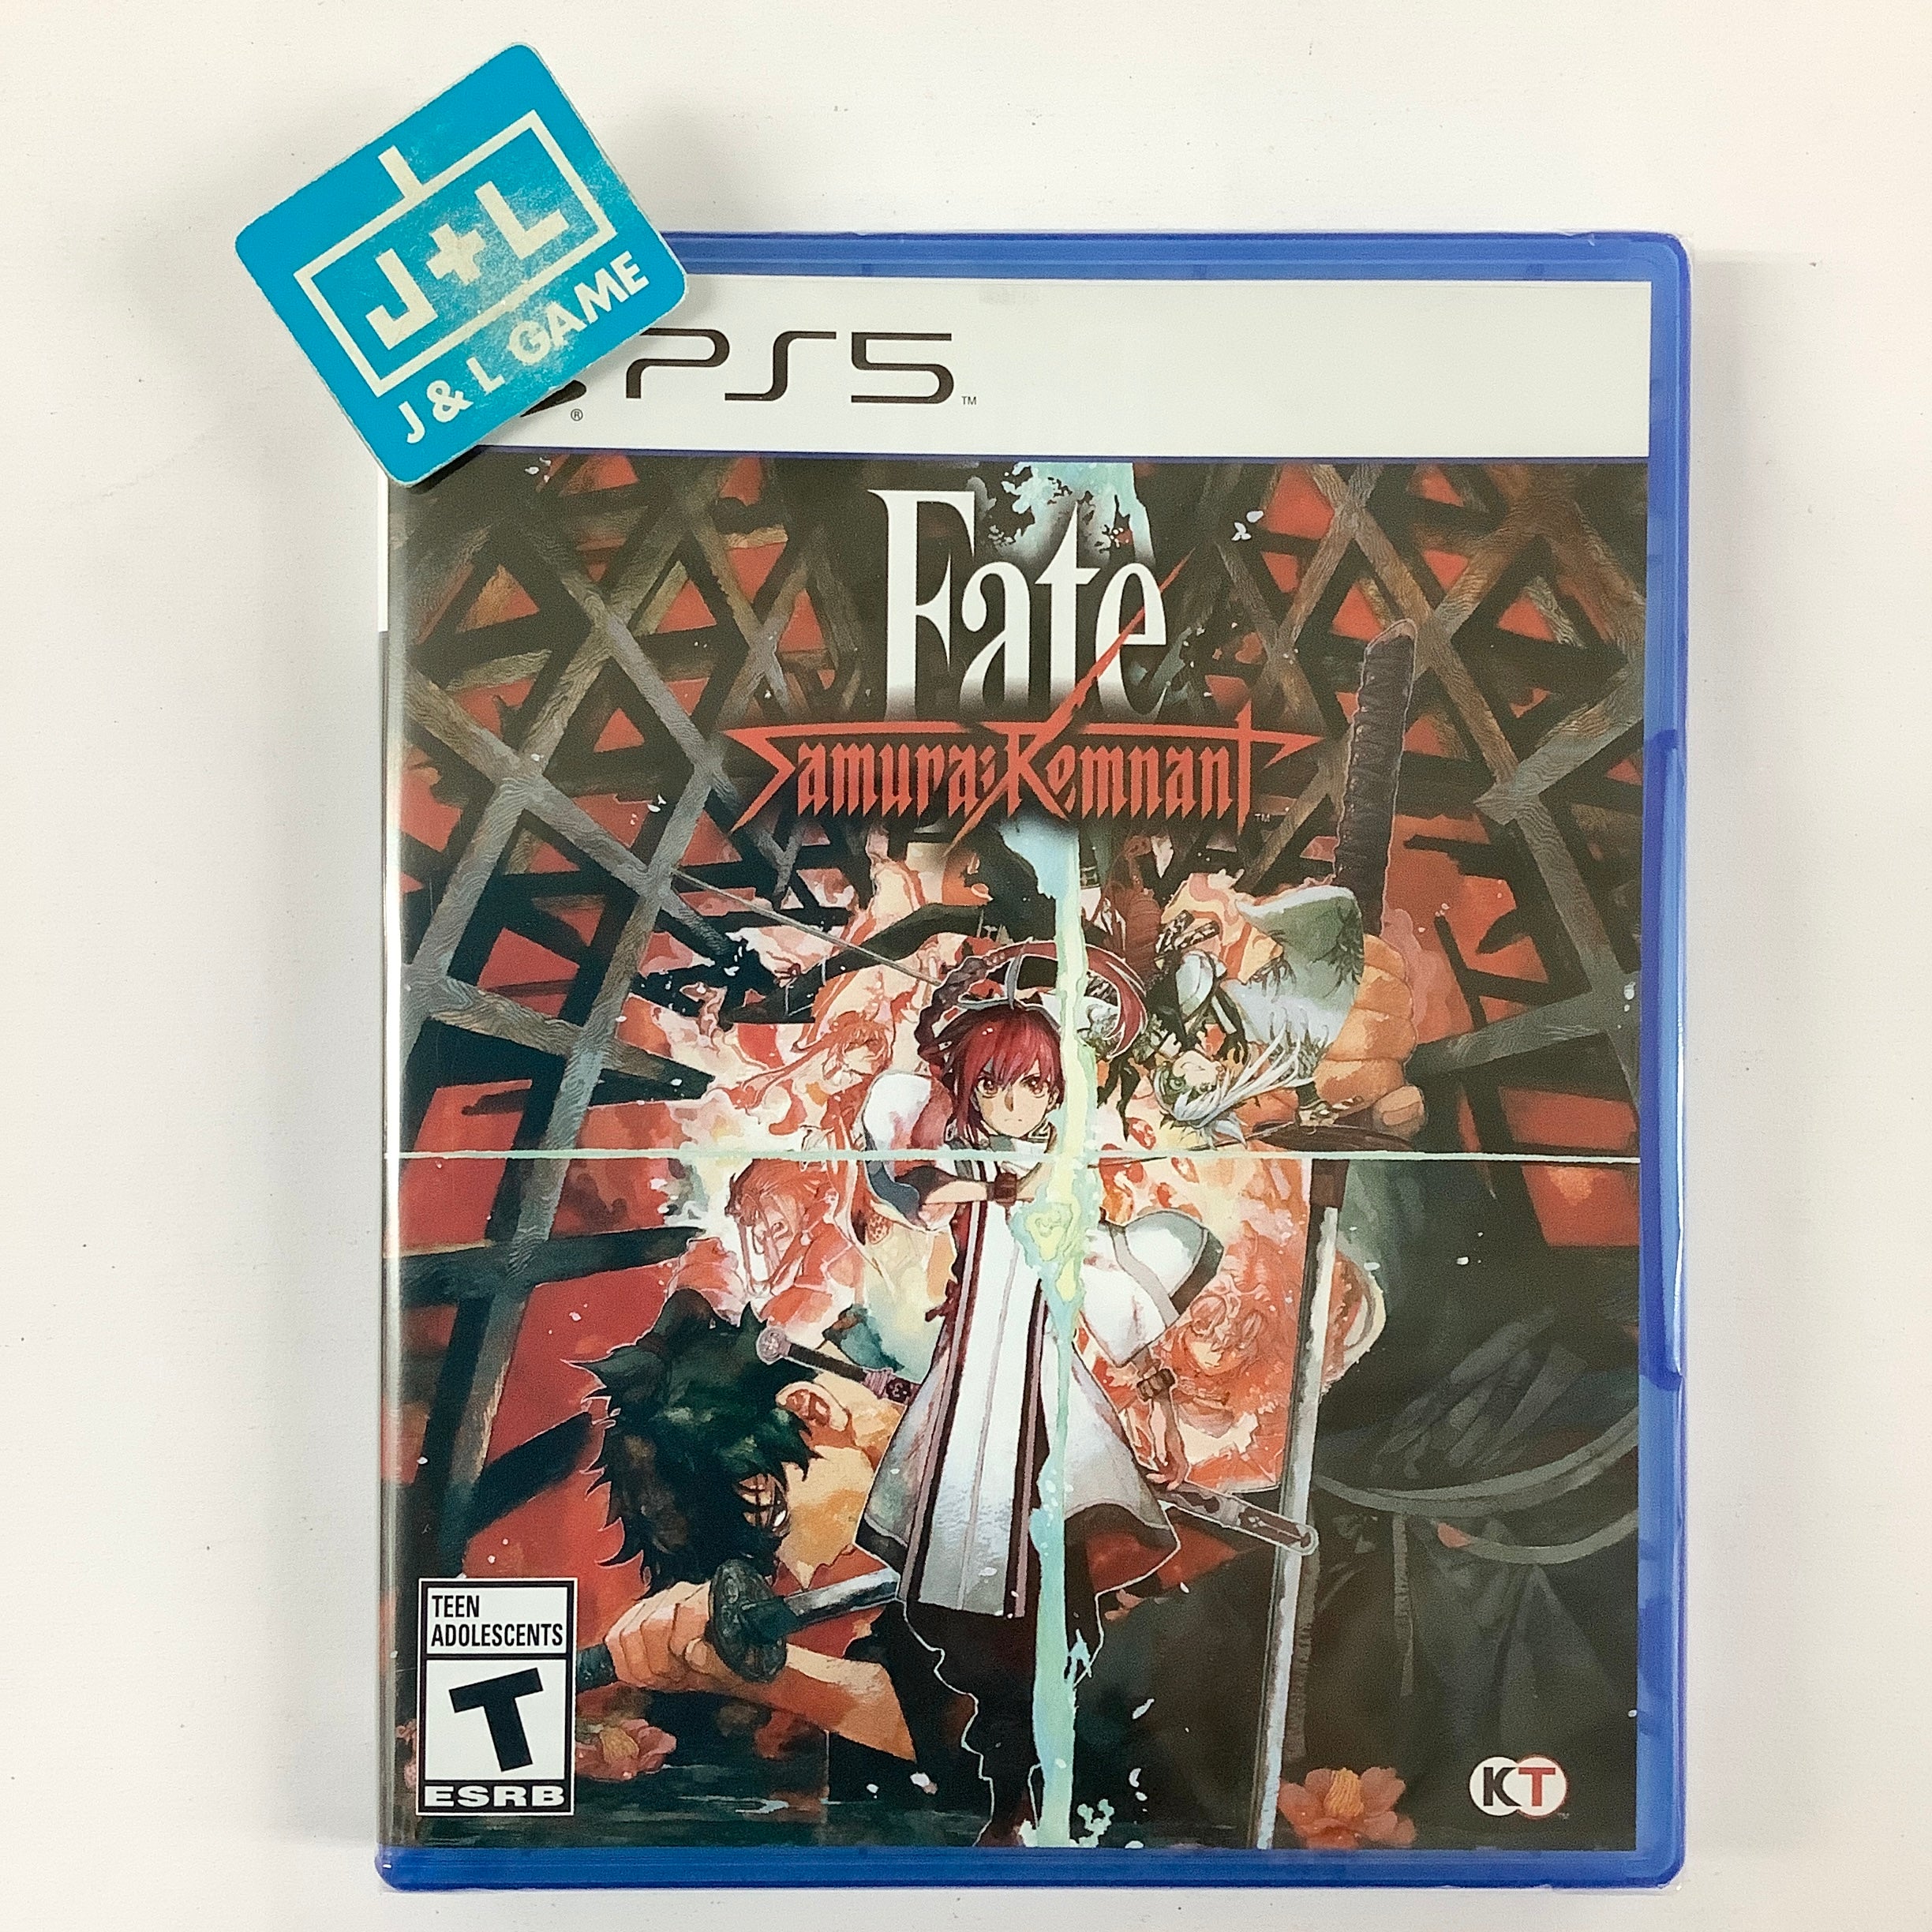 Fate/Samurai Remnant - (PS5) PlayStation 5